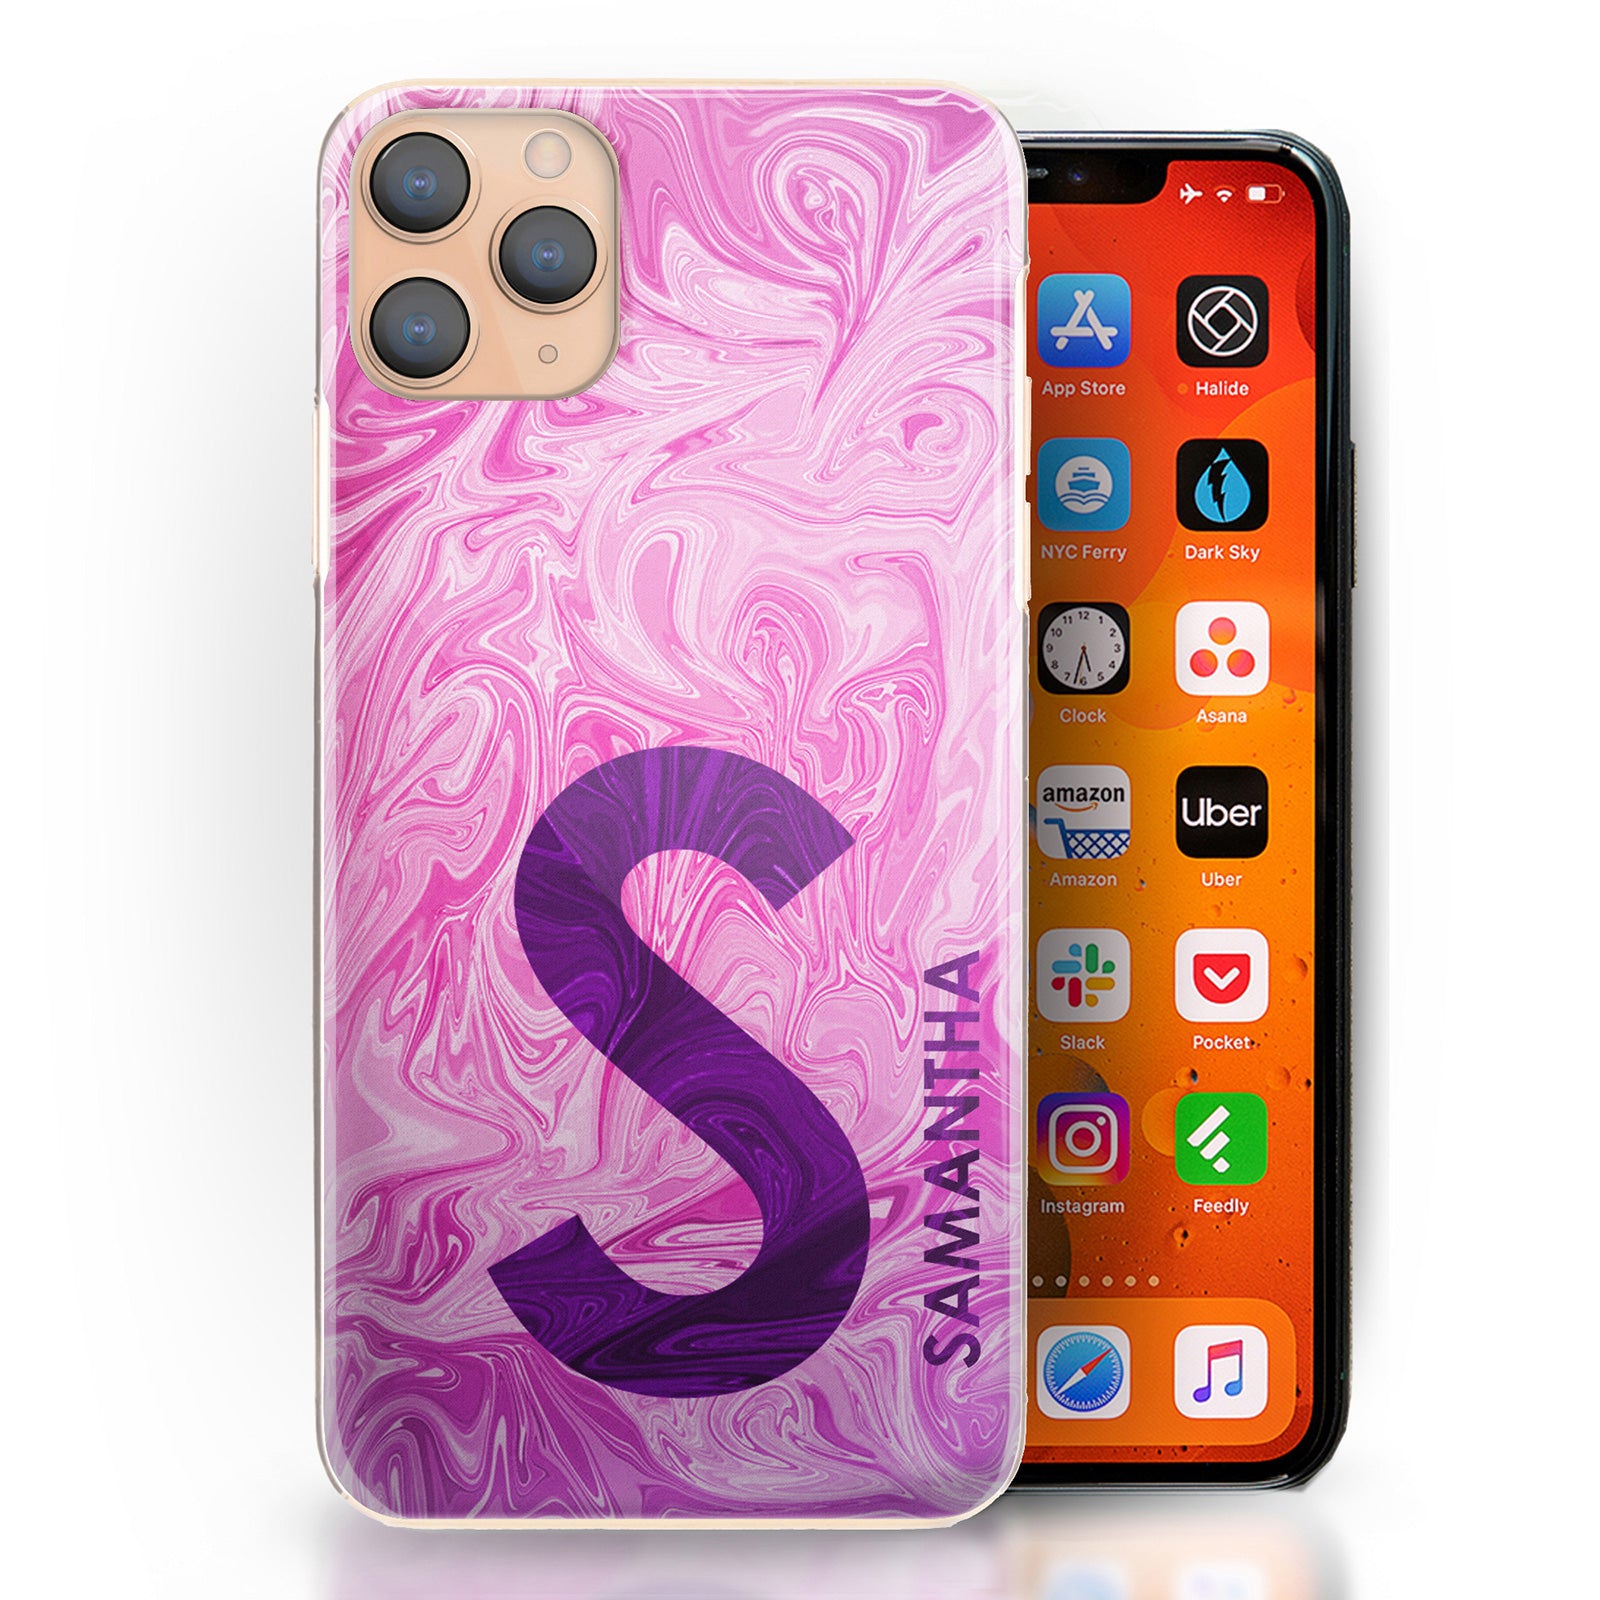 Personalised Nokia Phone Hard Case with Purple Text and Initial on Pink Swirled Marble